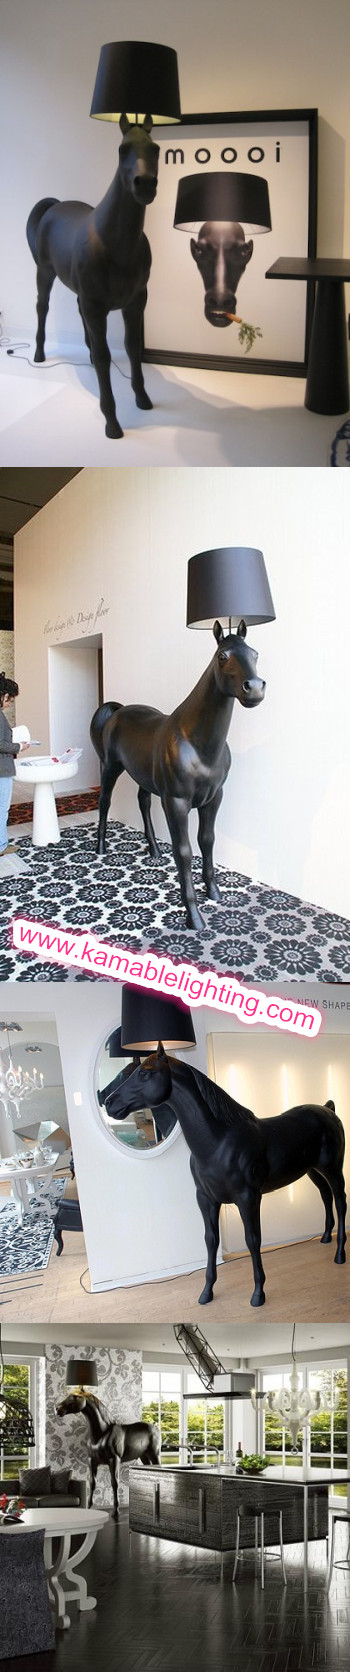 Newly Horse Floor Lamp for Hotel Decorative Lights (1029F)